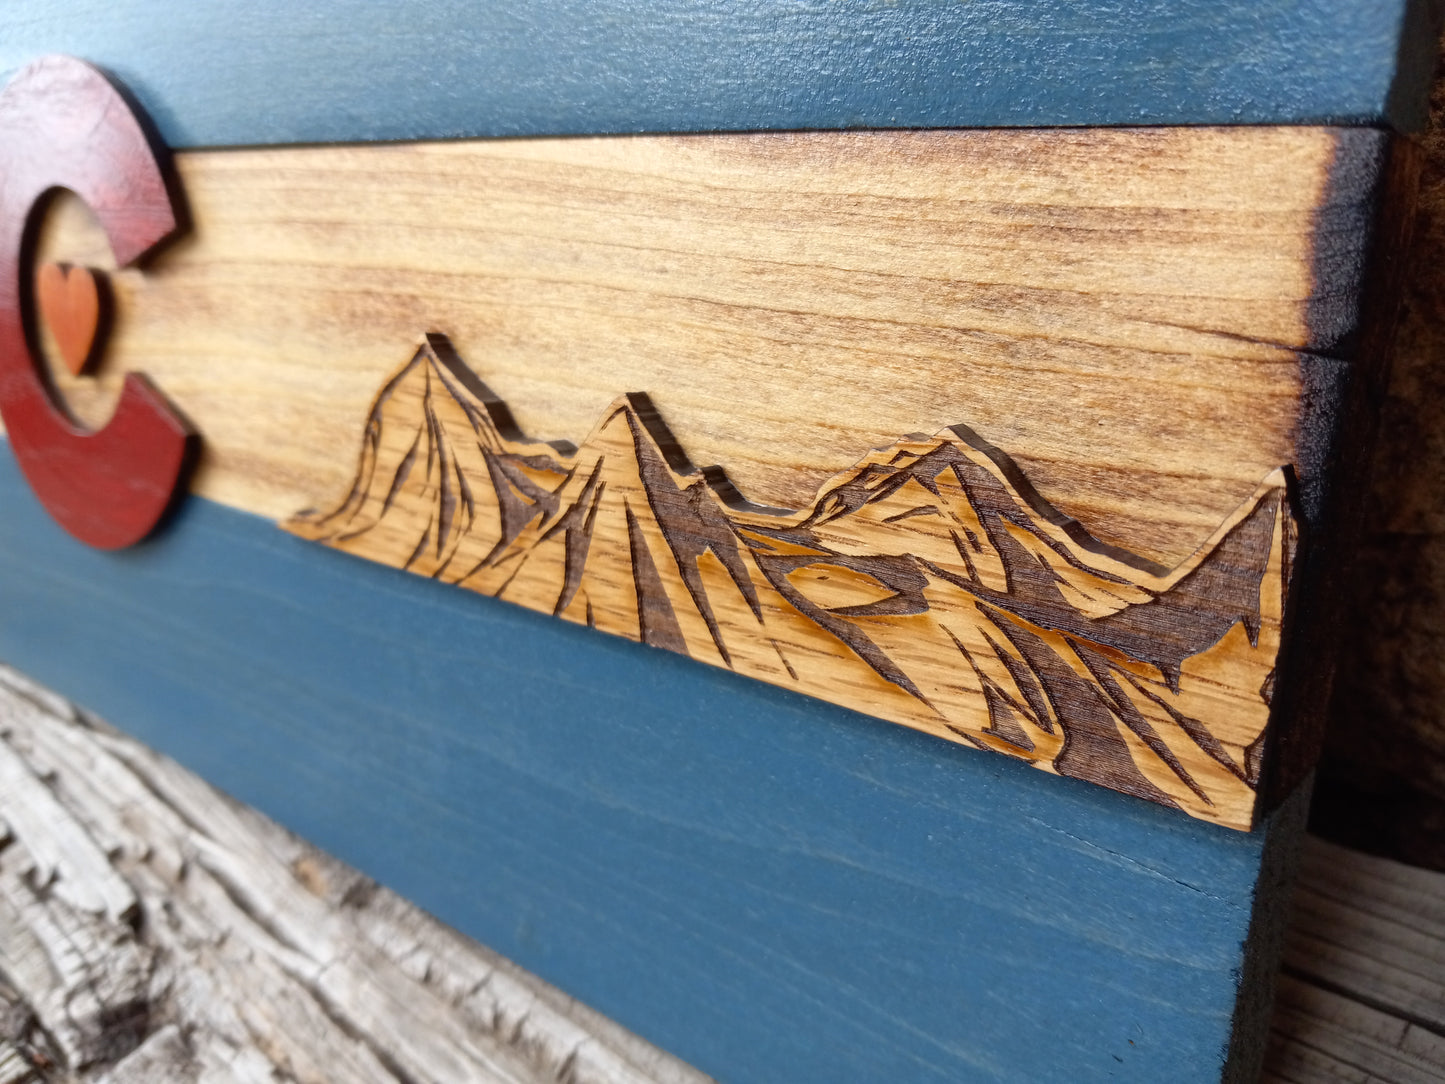 Rustic Colorado Flag with Mountains | MINI 12" x 6" | Engraved.